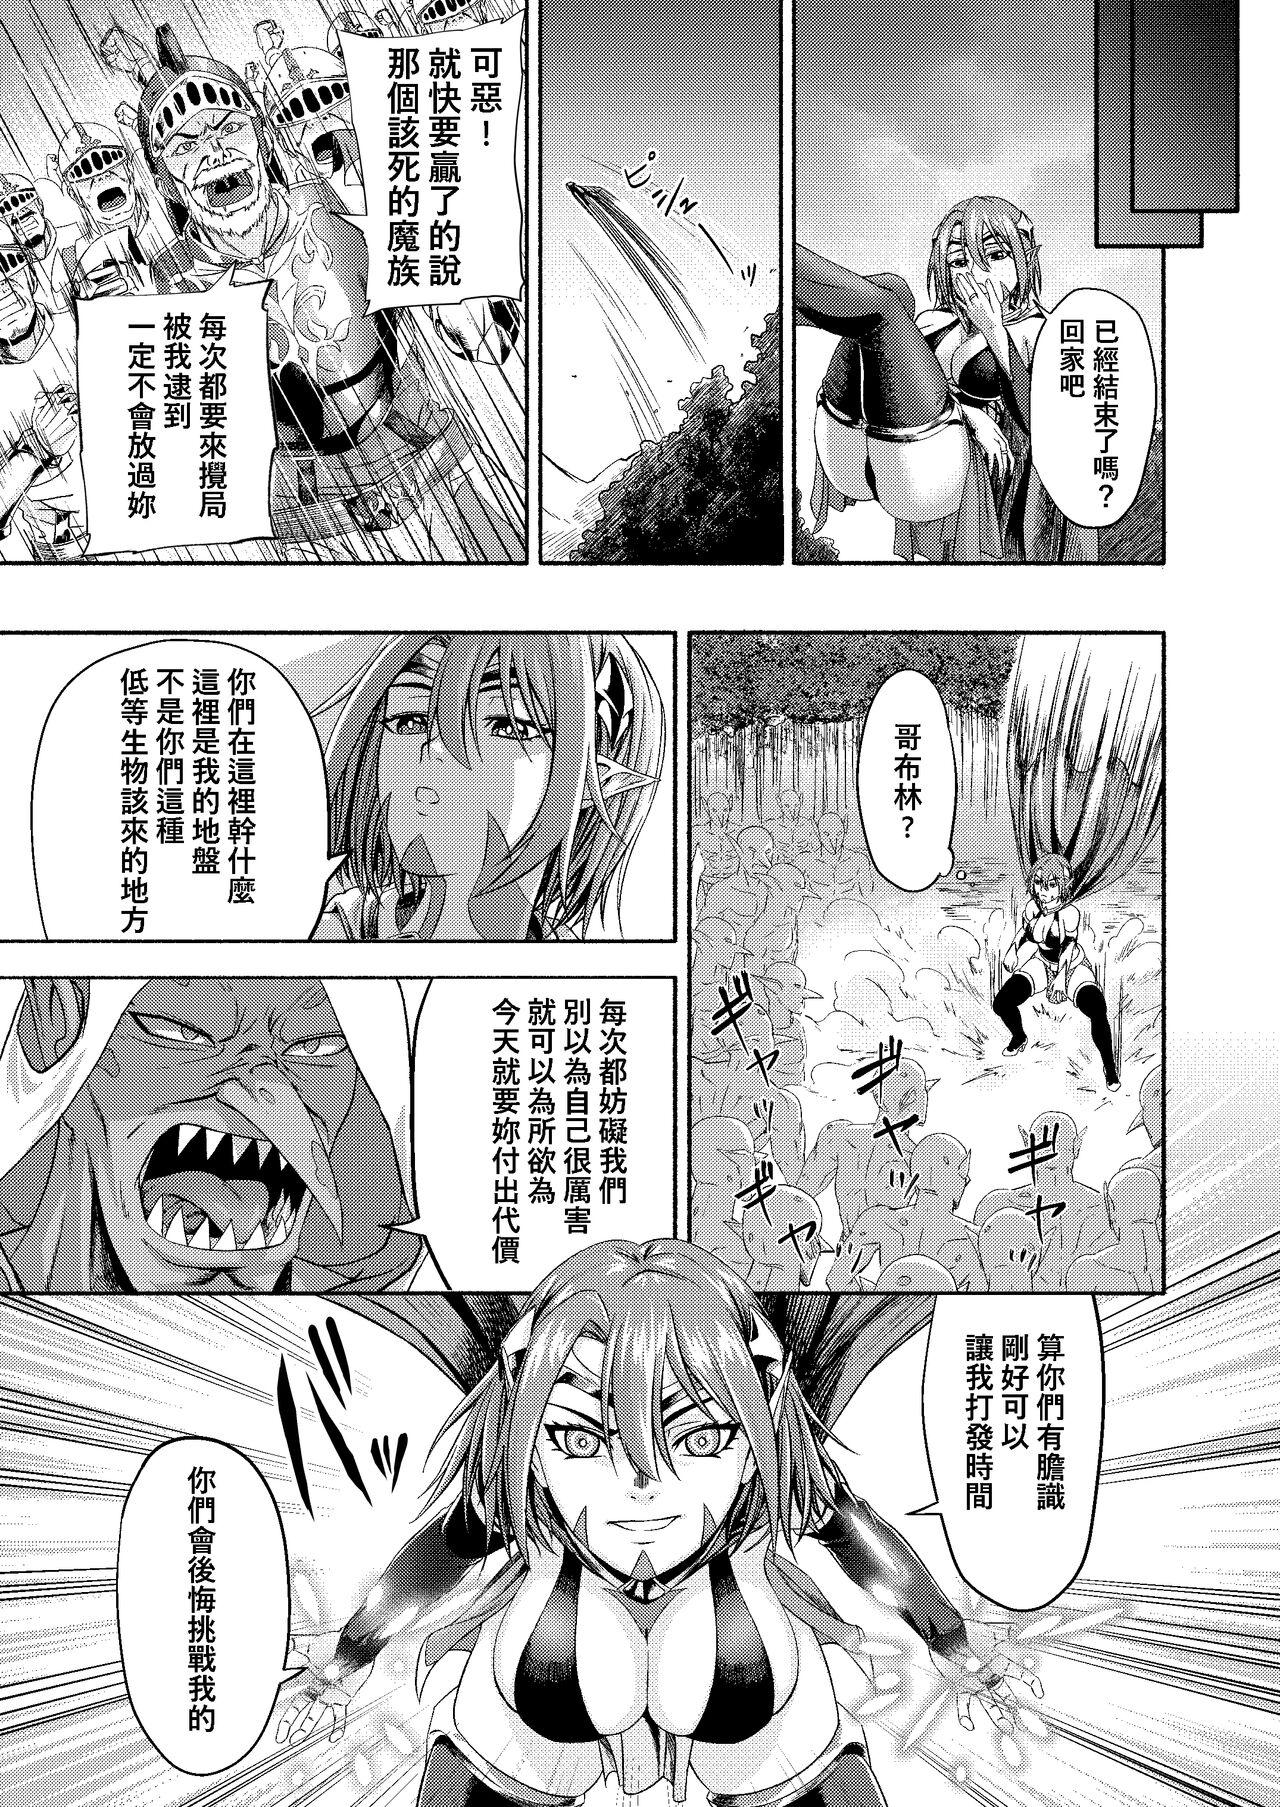 Actress Millennium Livestock-Candidate Demon King falls on Goblin Onaho Facesitting - Page 5